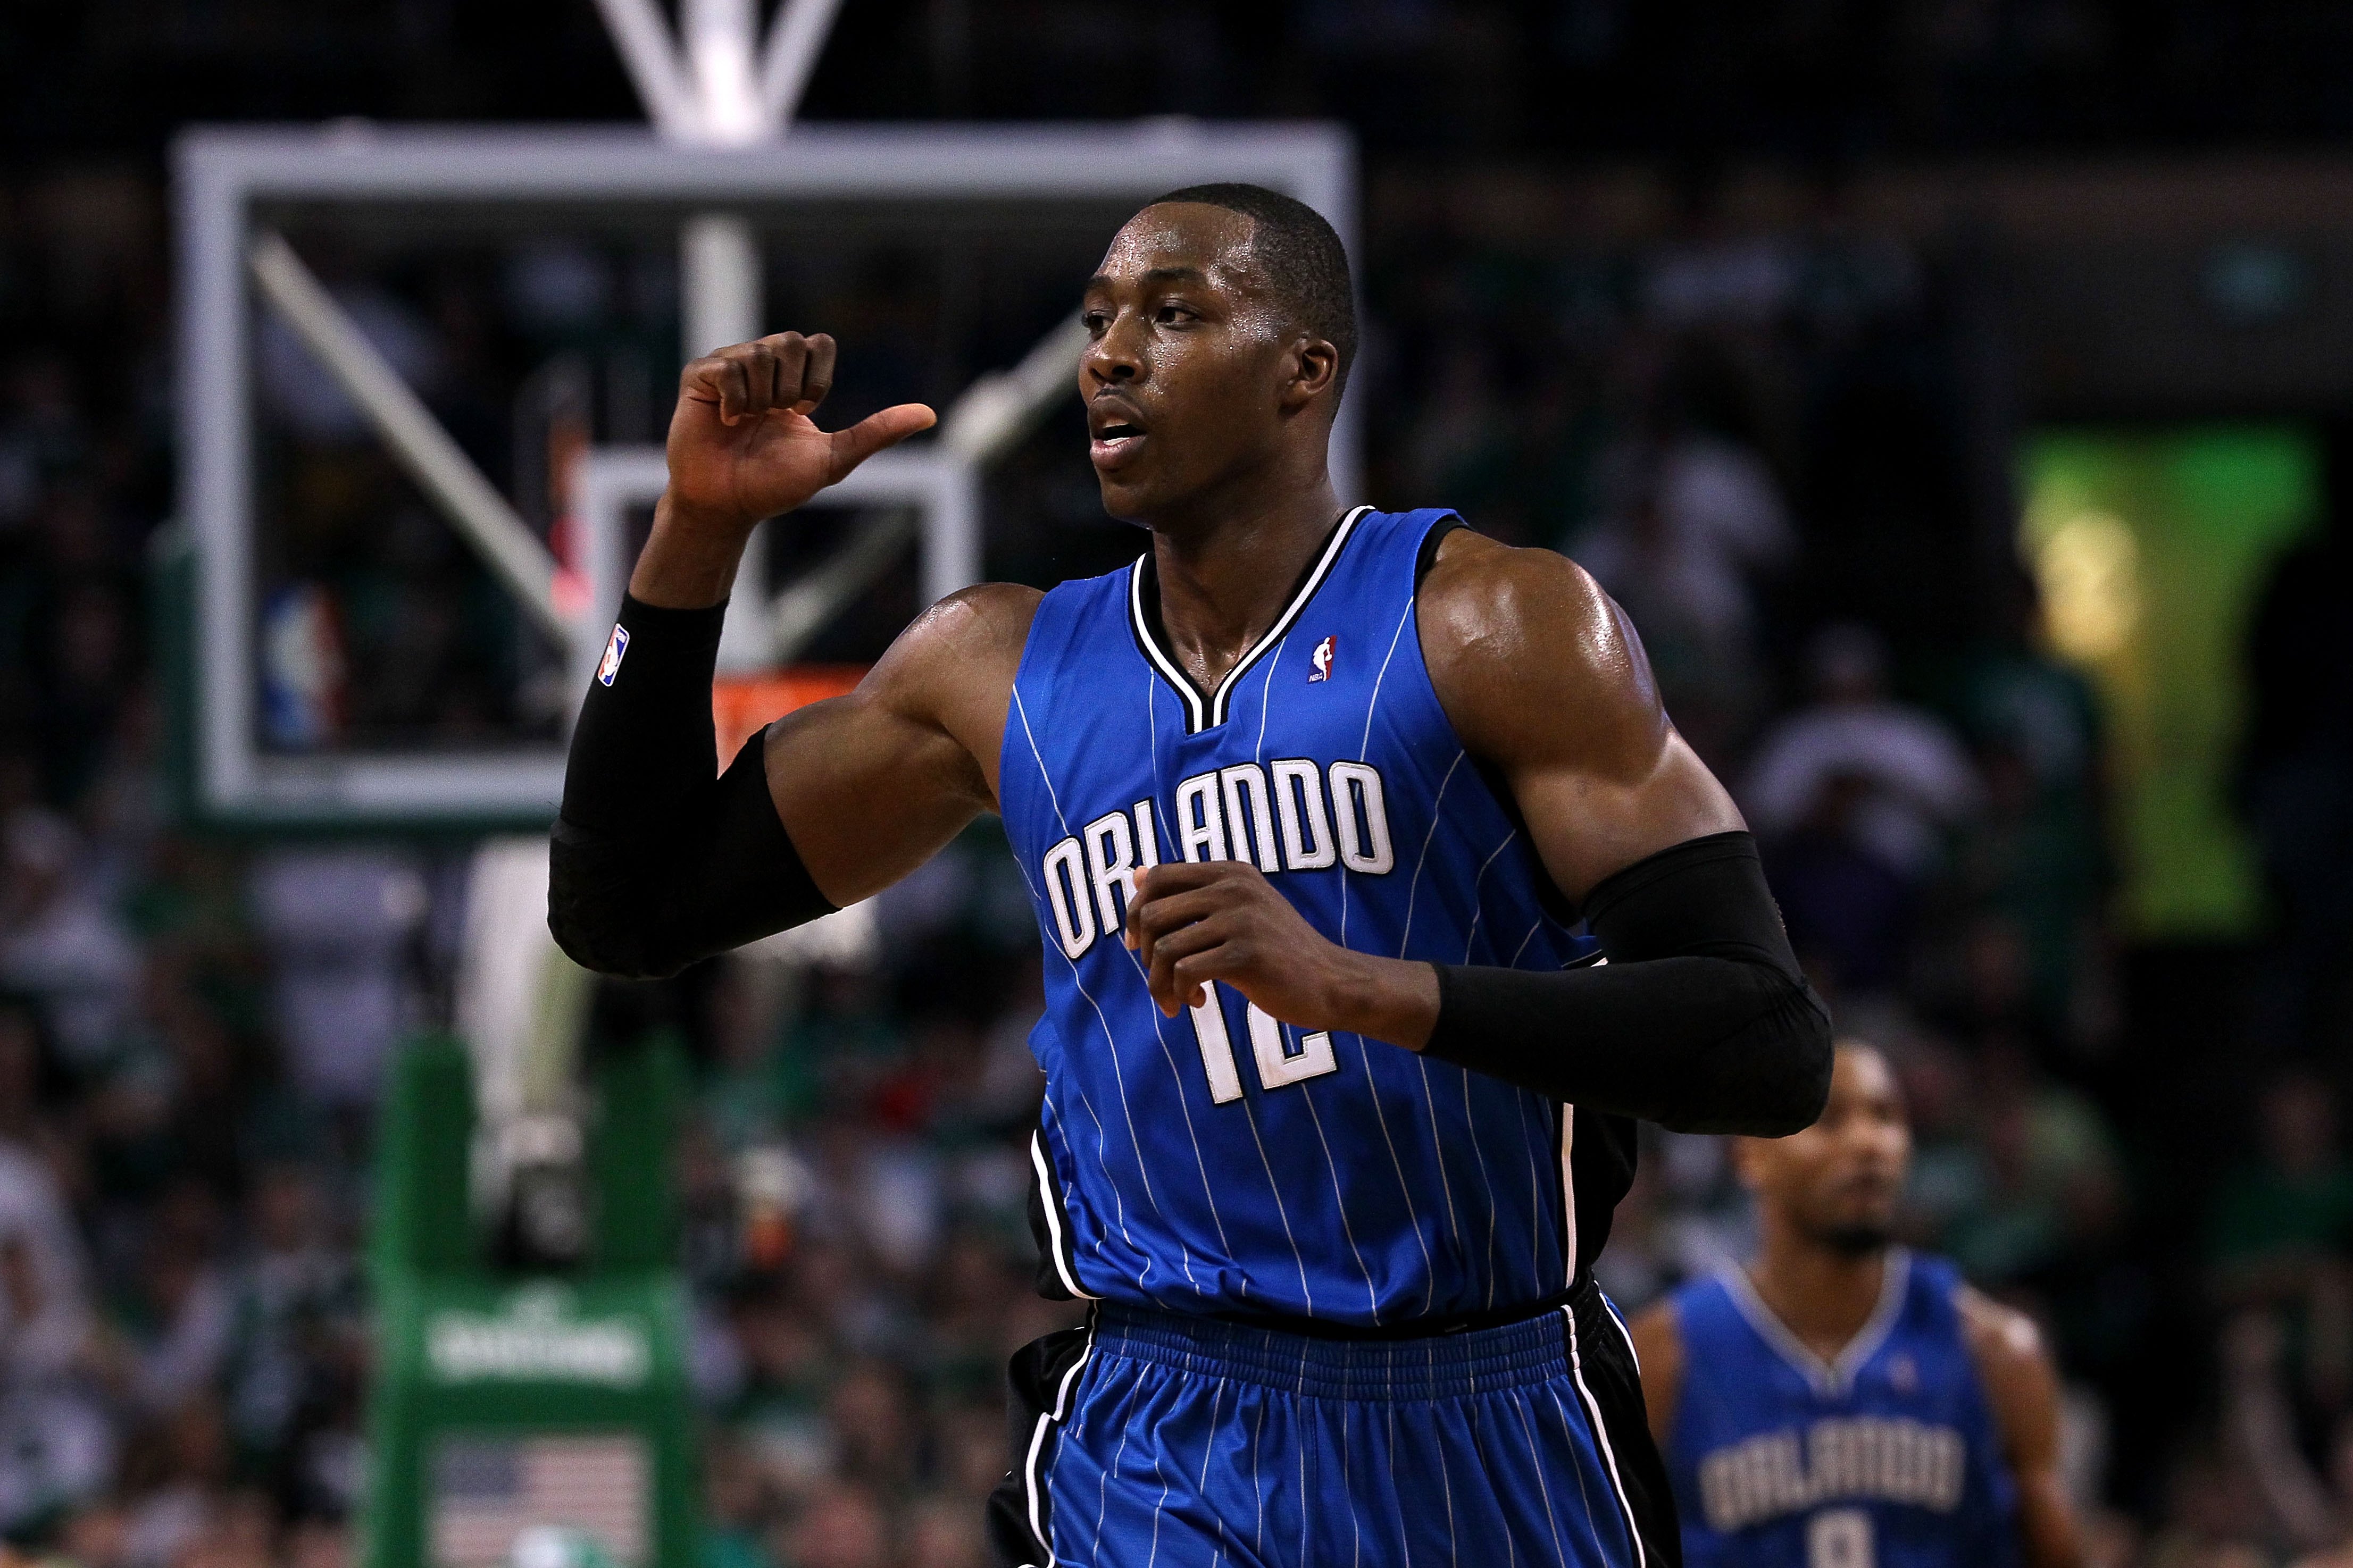 BOSTON - MAY 28:  Dwight Howard #12 of the Orlando Magic gestures as he runs up court against the Boston Celtics in Game Six of the Eastern Conference Finals during the 2010 NBA Playoffs at TD Garden on May 28, 2010 in Boston, Massachusetts.  NOTE TO USER